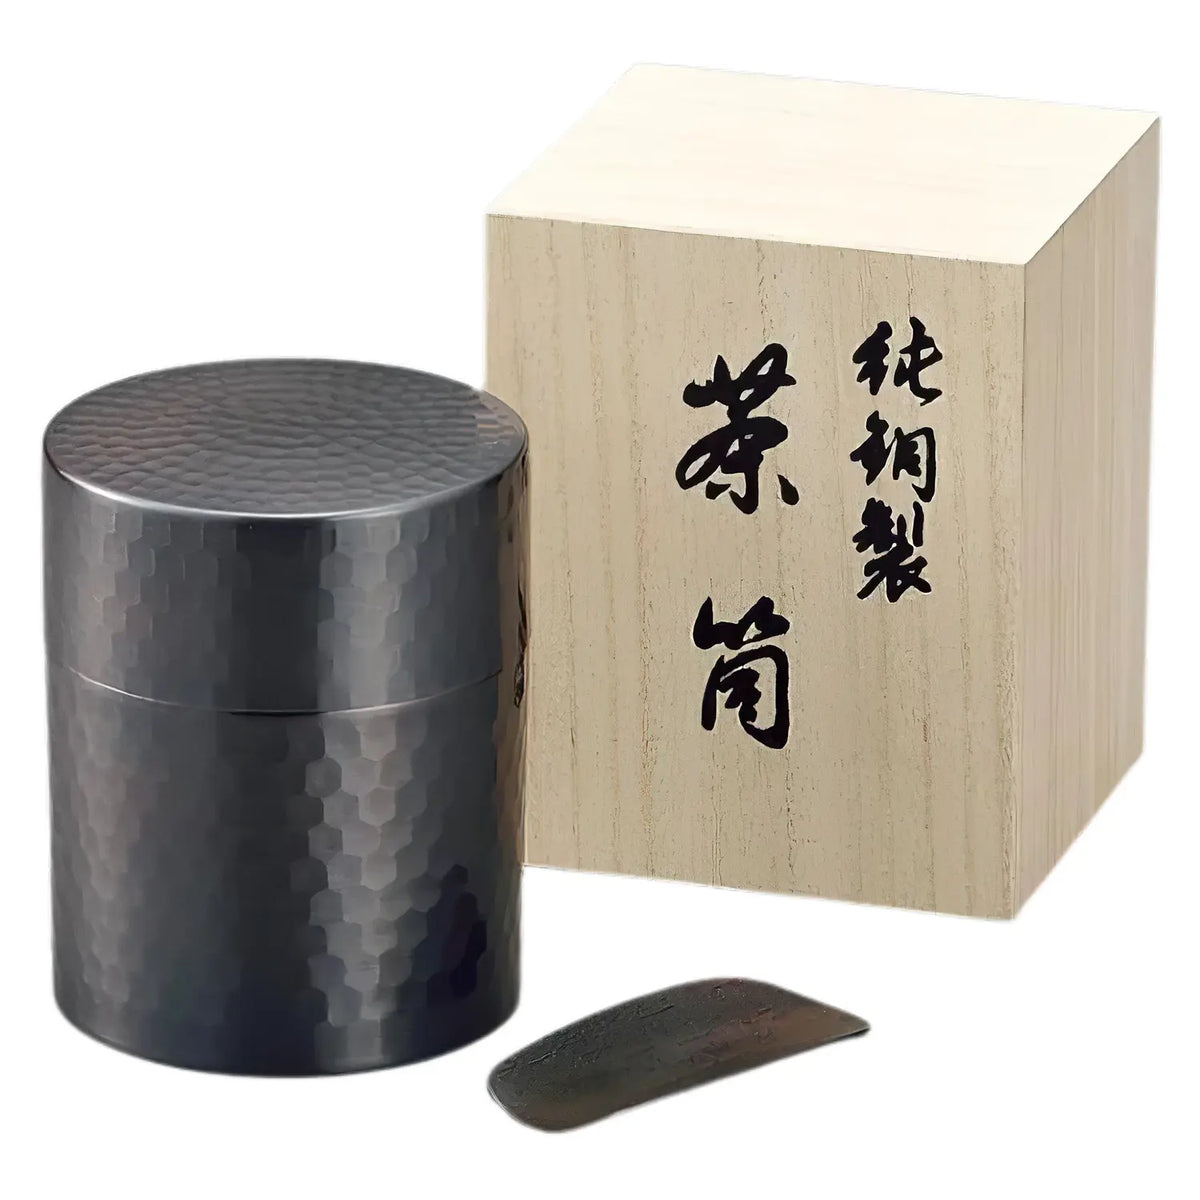 Asahi Copper Loose Tea Leaf Canister Chazutsu Tea Caddy with Caddy Spoon (Gift-Boxed)